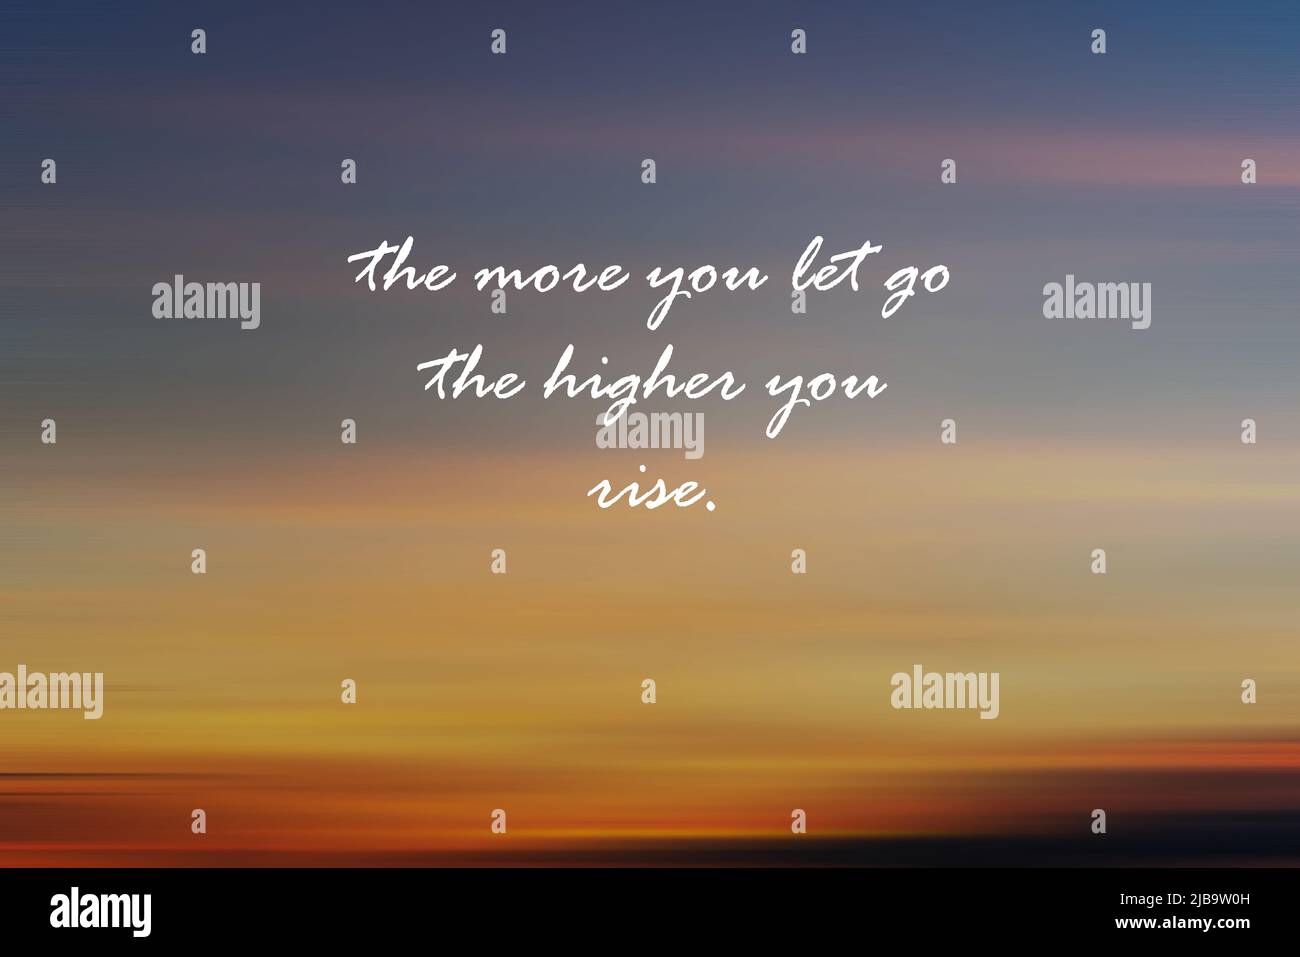 Motivational and inspirational quotes -  The more you let go the higher you rise Stock Photo